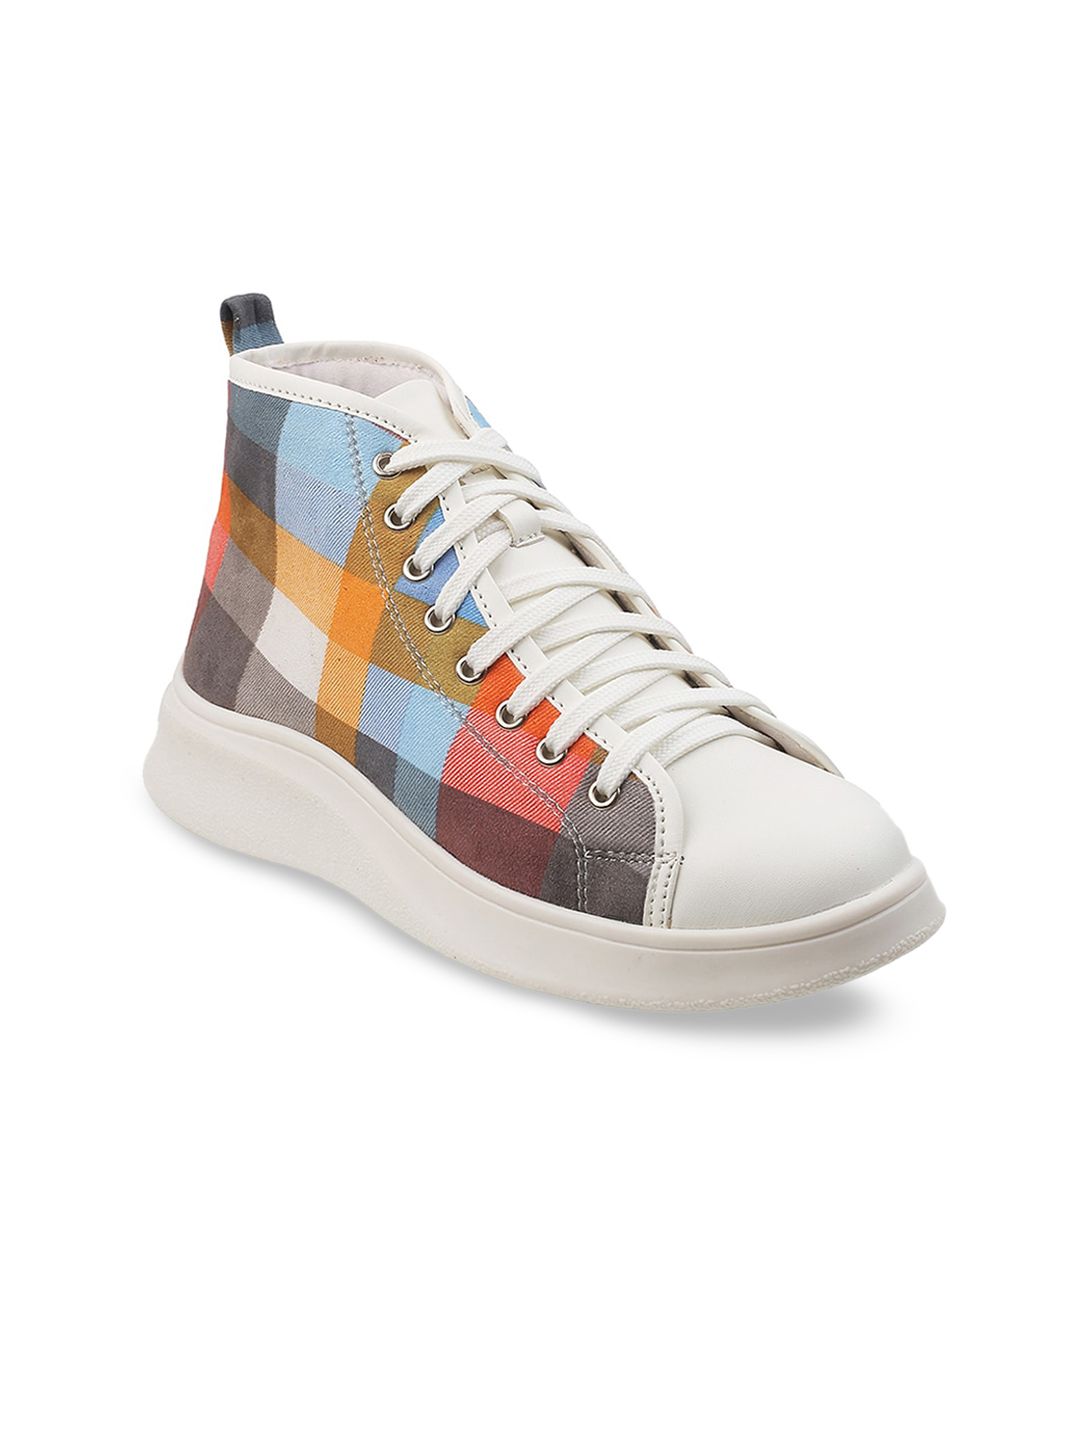 Mochi Women Multicolor Checked Lace Up Sneaker Shoes Price in India